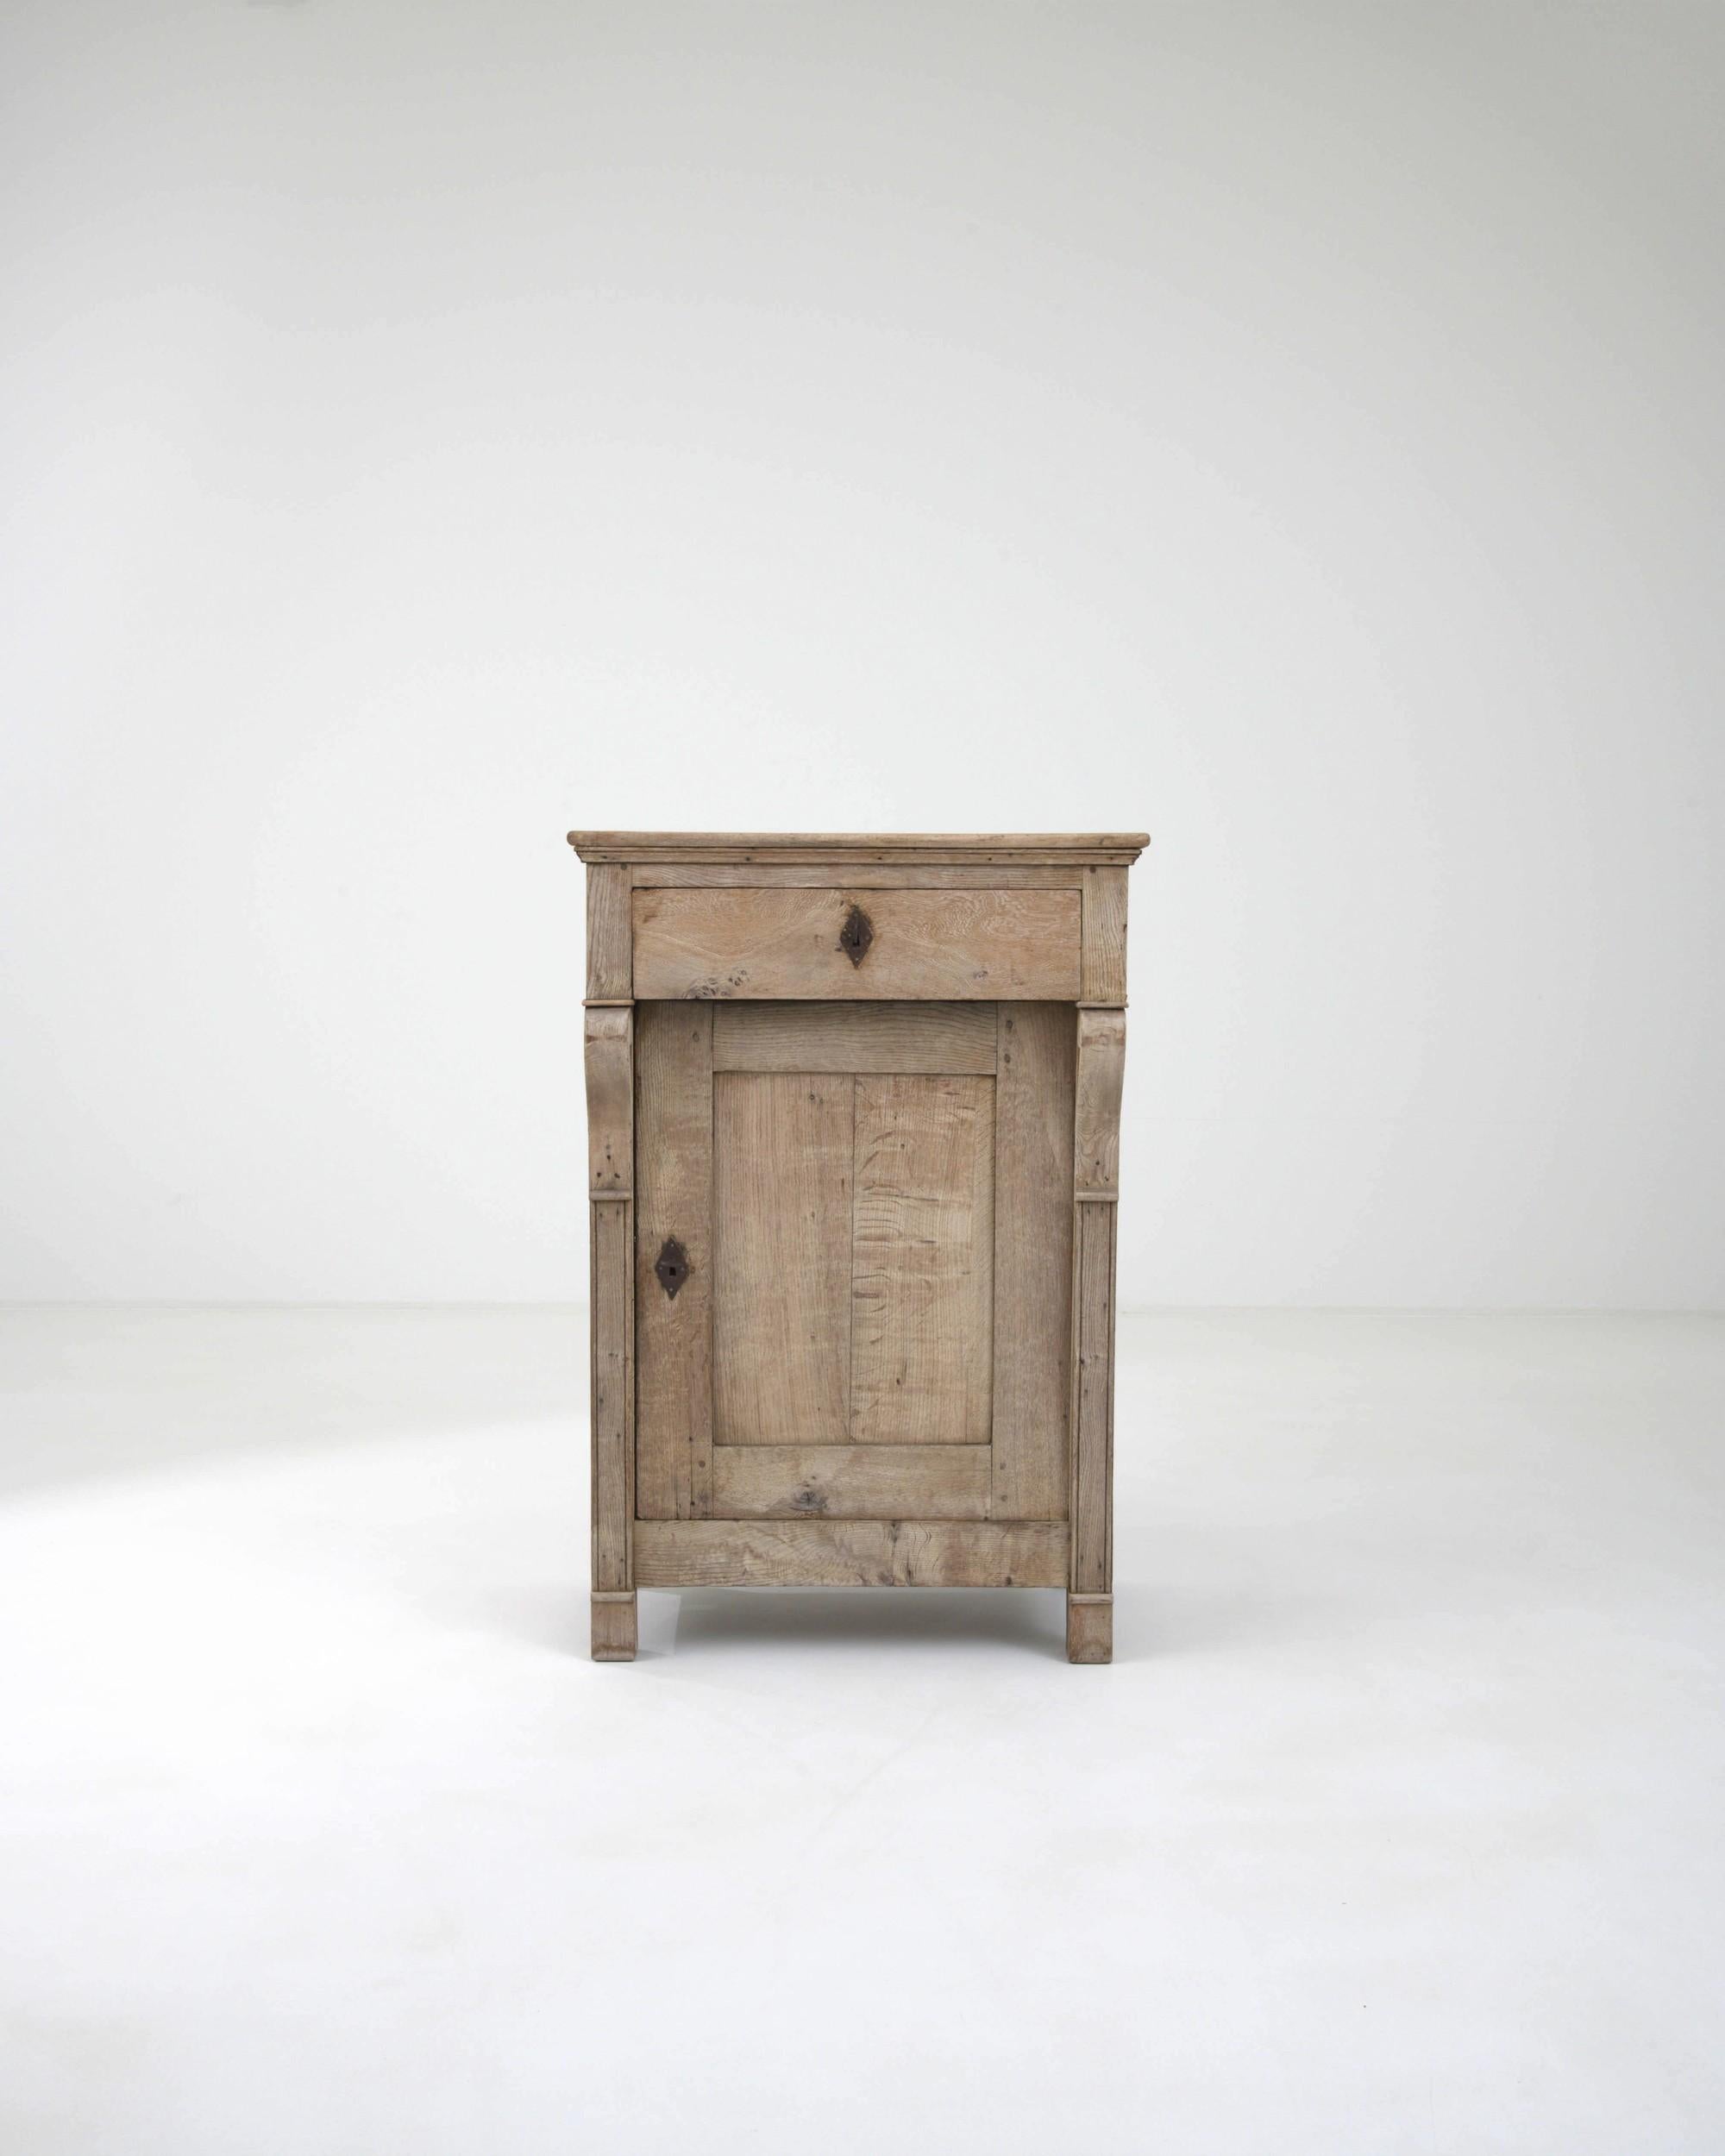 The restrained elegance and soft natural finish of this antique oak buffet creates an impression of serenity. Hand-built in France in the 1800s, the form reflects the bold, simple lines and understated majesty of Empire style. The overhang of the